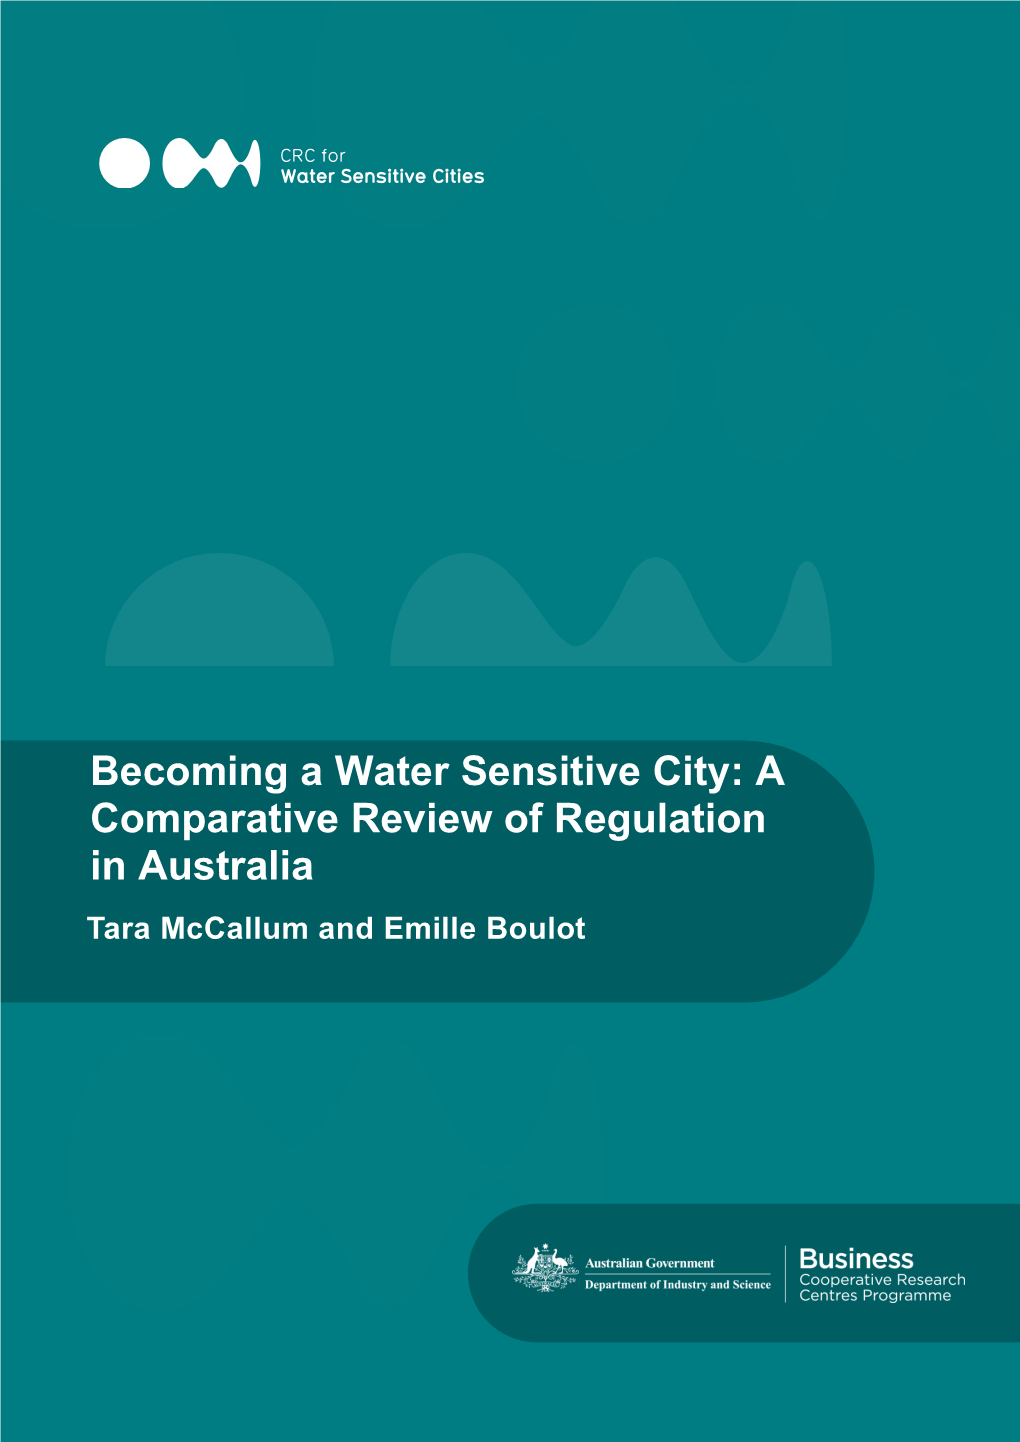 Becoming a Water Sensitive City: a Comparative Review of Regulation in Australia